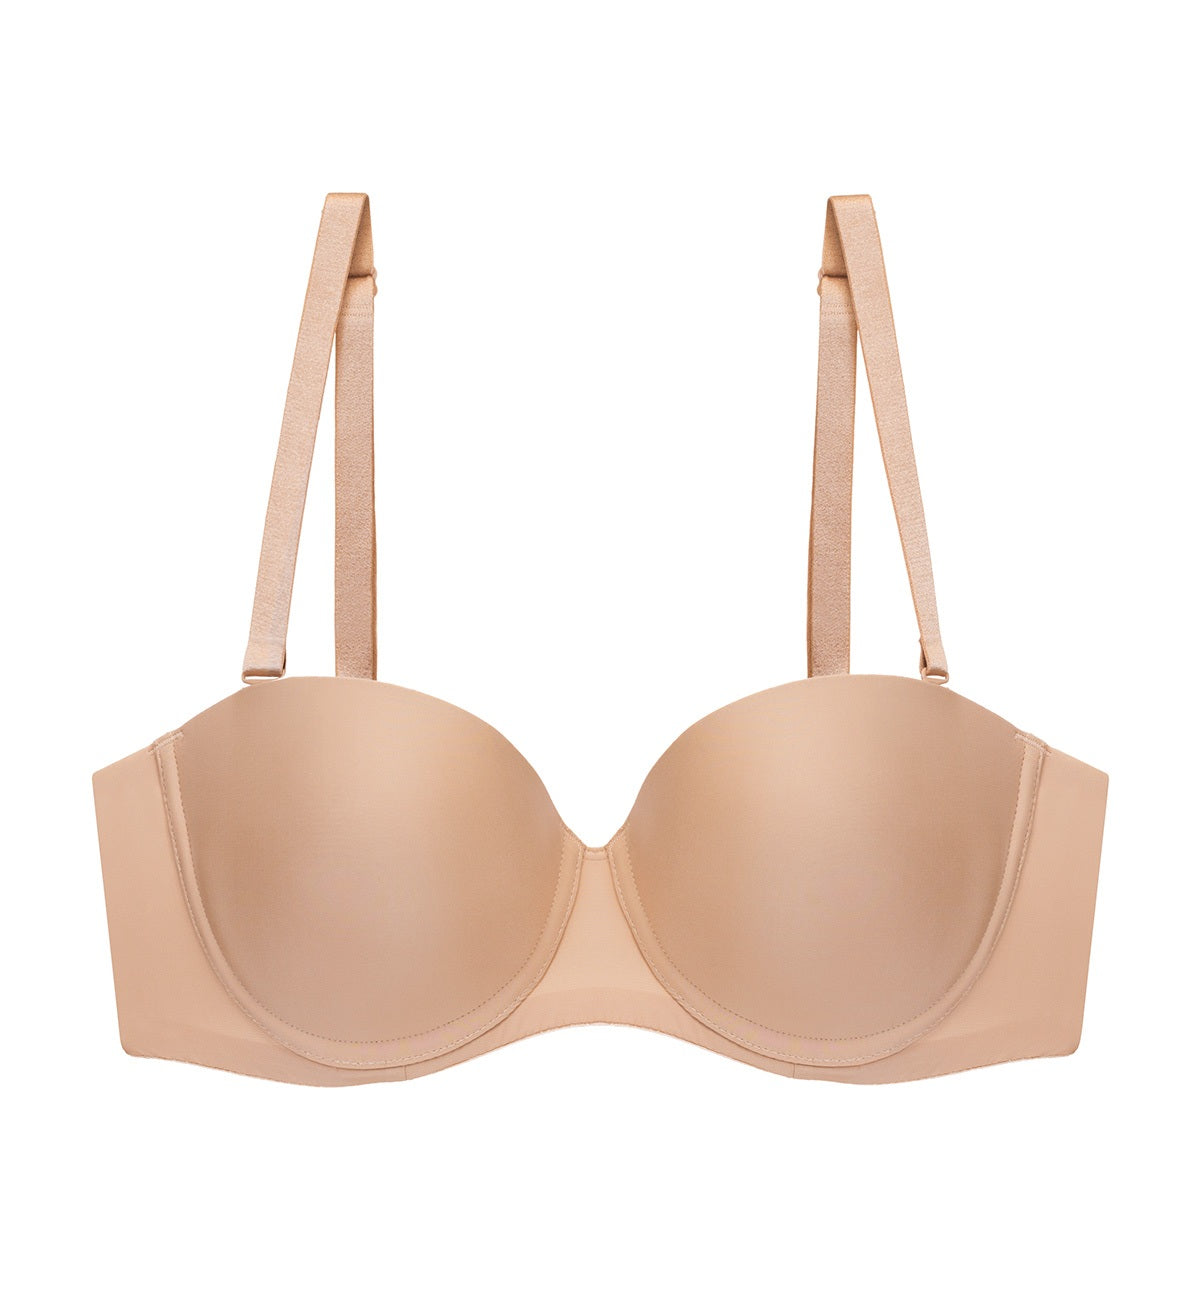 Body Make Up Wired Push Up Bra With Detachable Straps in Smooth Skin